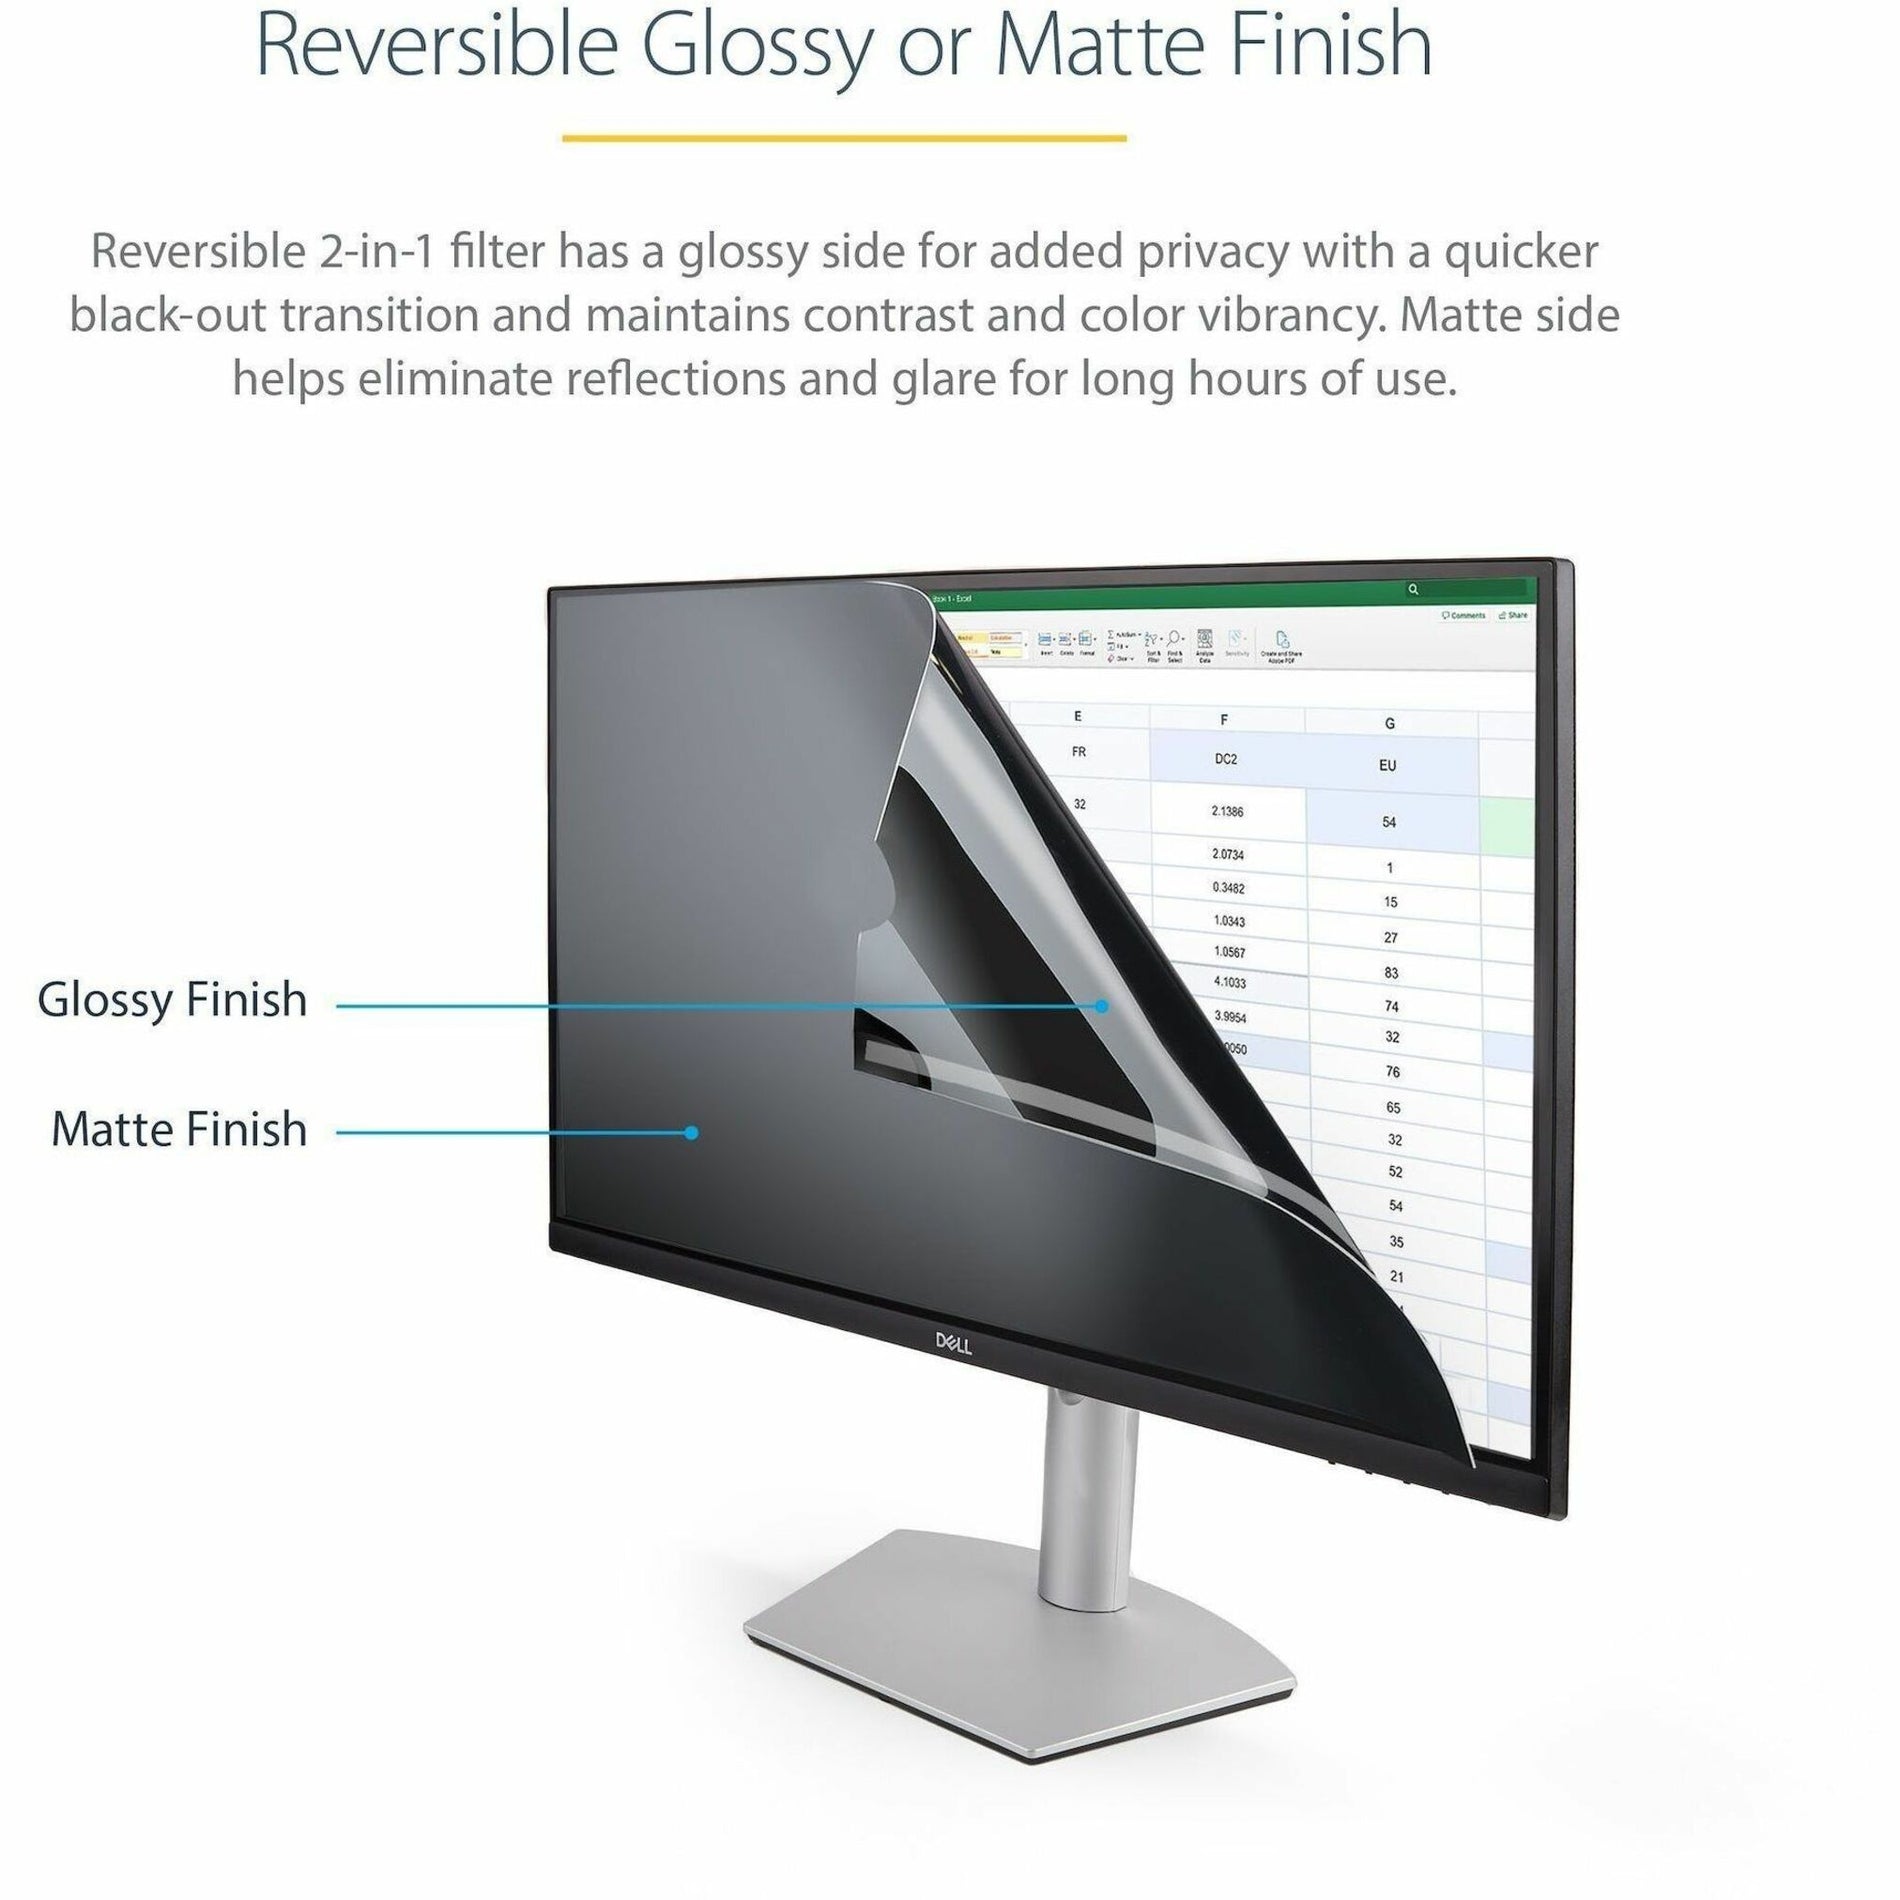 StarTech.com PRIVACY-SCREEN-185M Privacy Screen Filter, Blue Light Reduction, Reversible Matte-to-Glossy, 16:9, 18.5" Monitor